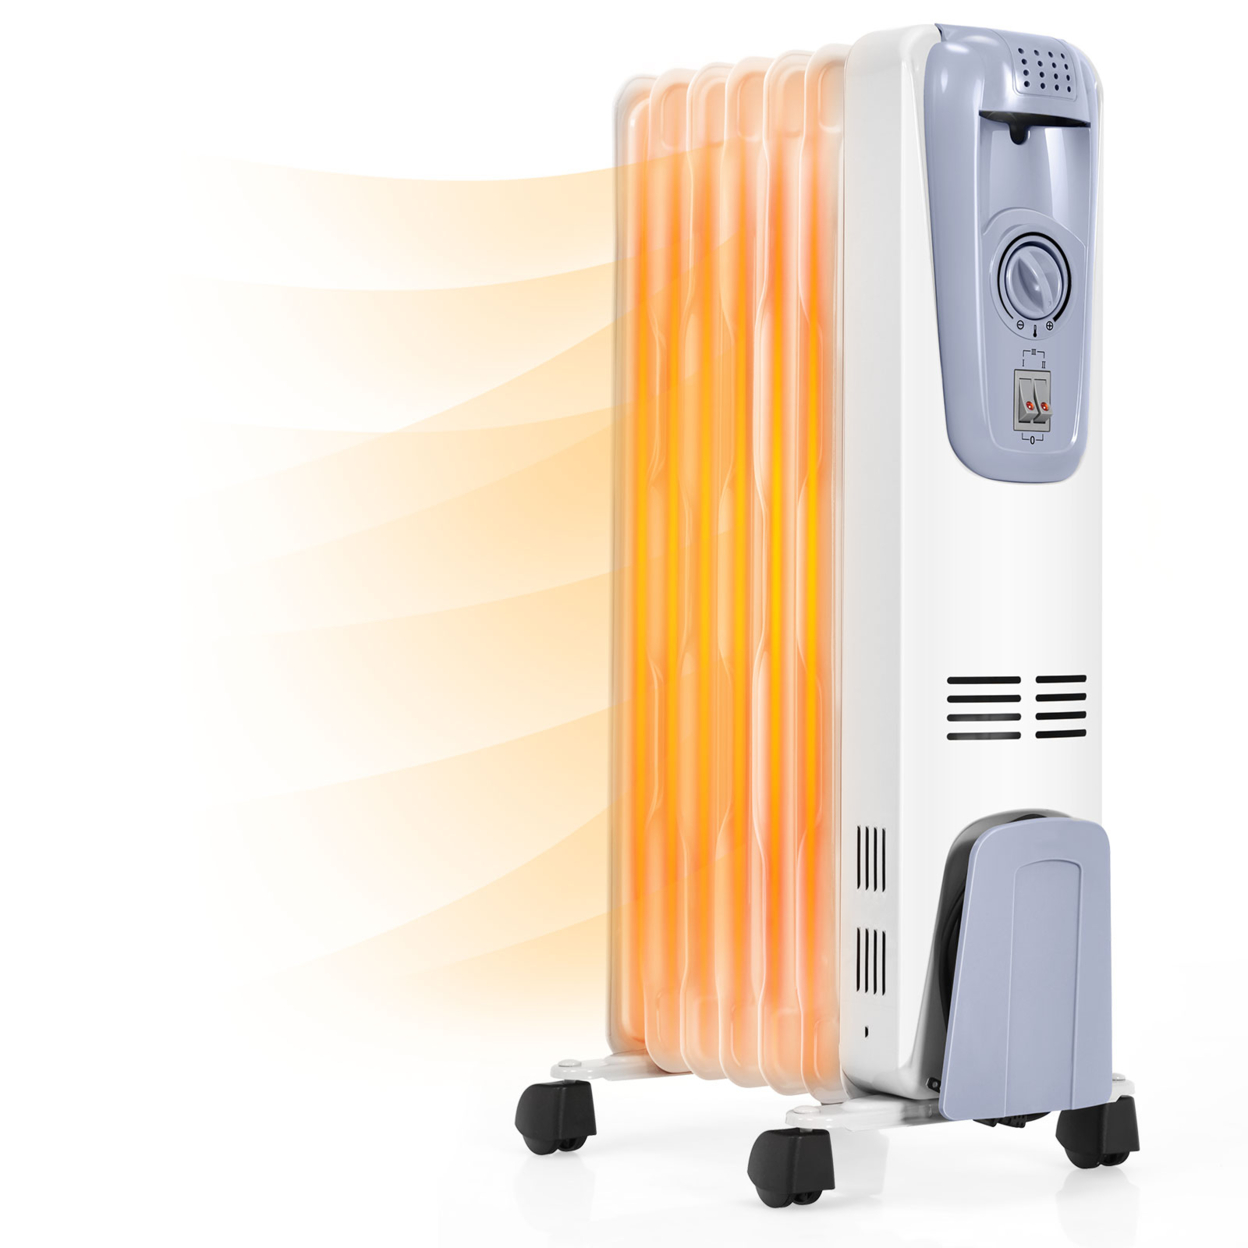 1500W Oil Filled Space Heater Radiator W/ Adjustable Thermostat Home Office